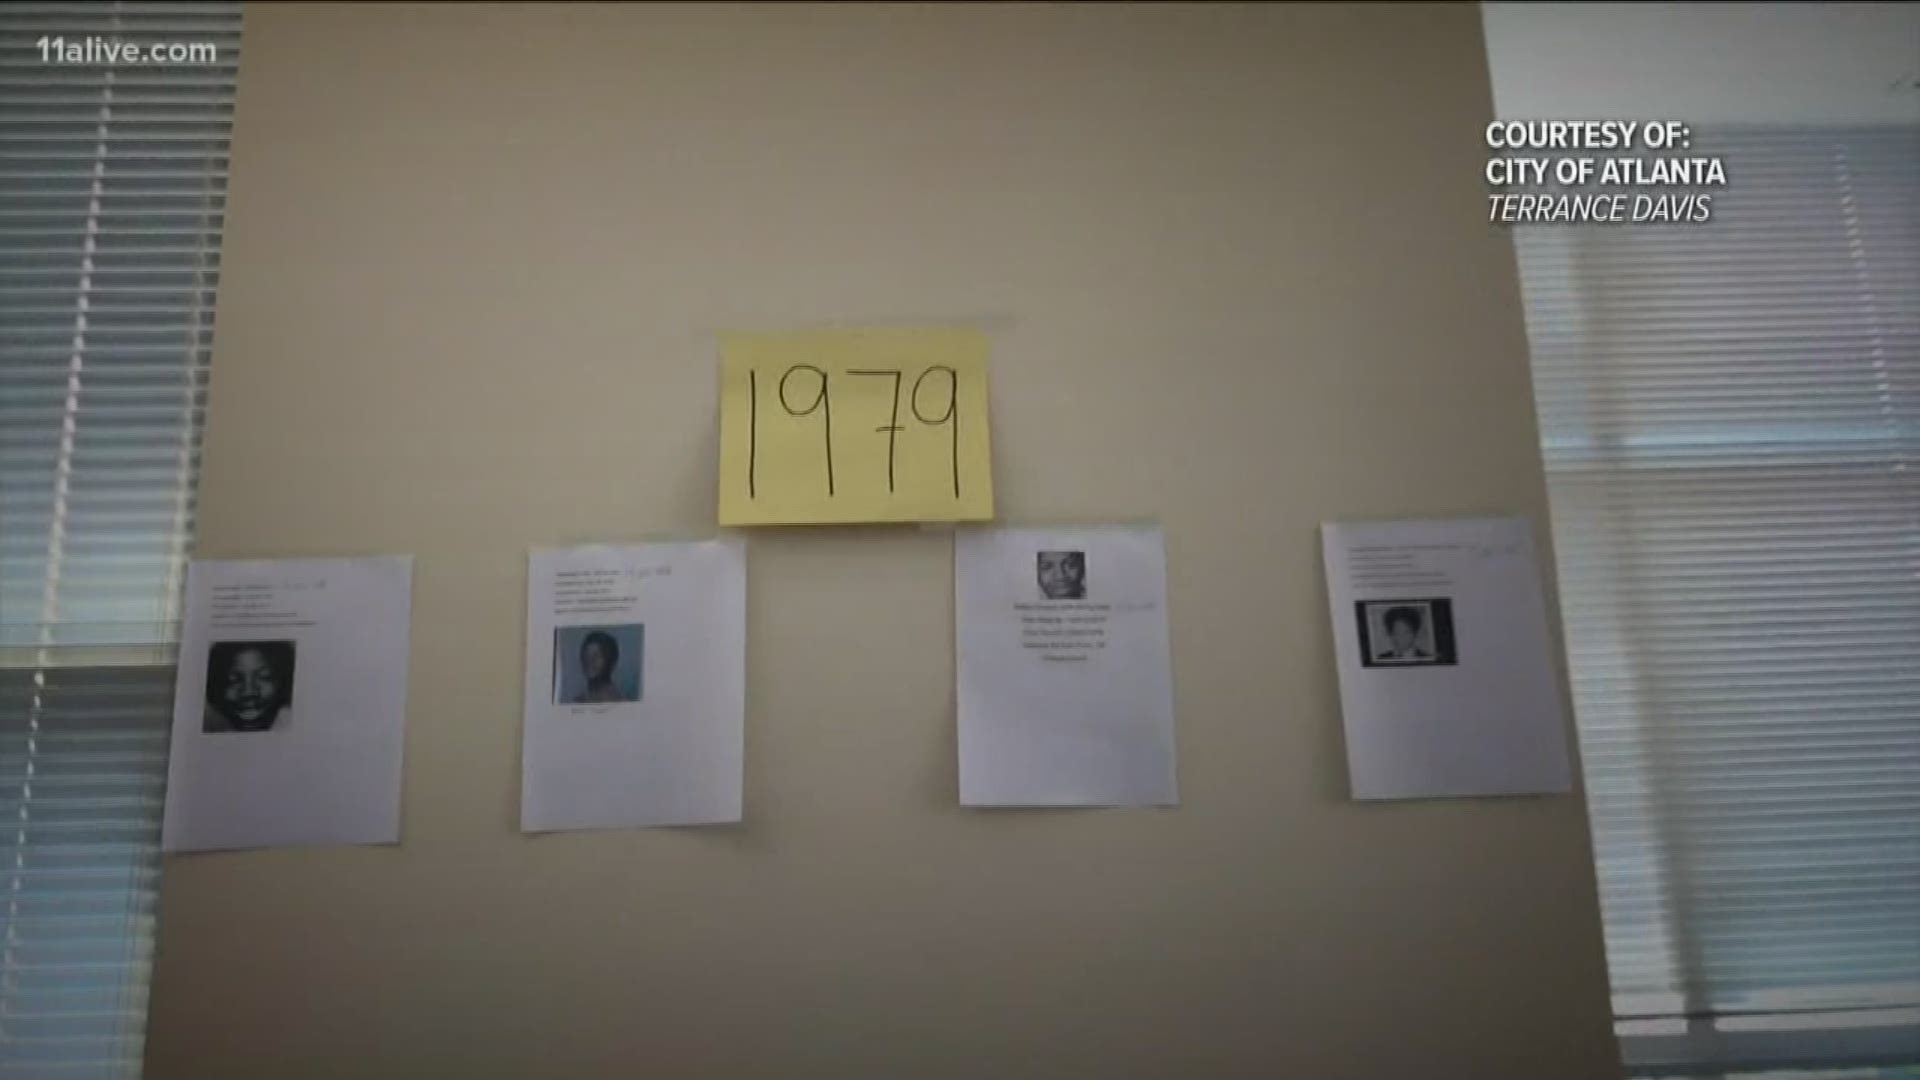 Atlanta Police have reopened an inquiry into the infamous cases involving the murder of dozens of children in the area between 1979-81.